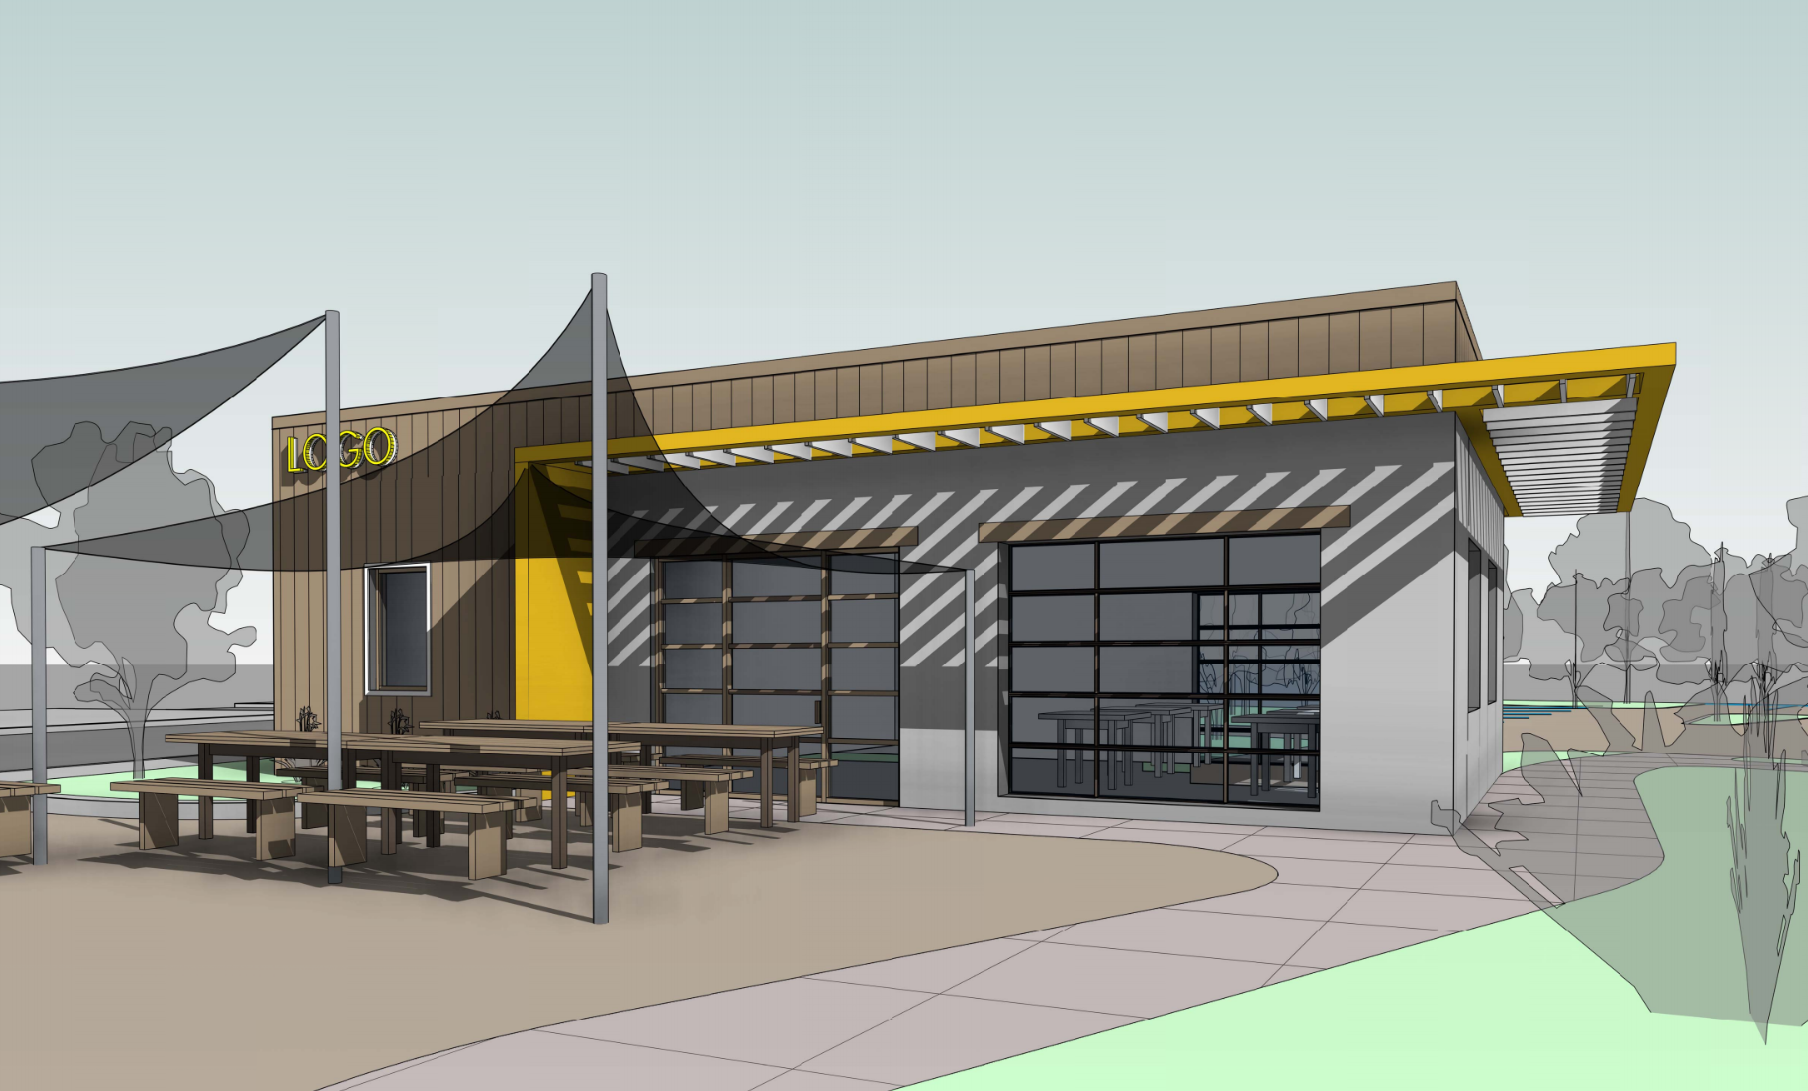 A rendering of a stout, modern-looking building with glass garage doors and a slatted yellow awning. In front of the restaurant are black sun shades above seating.